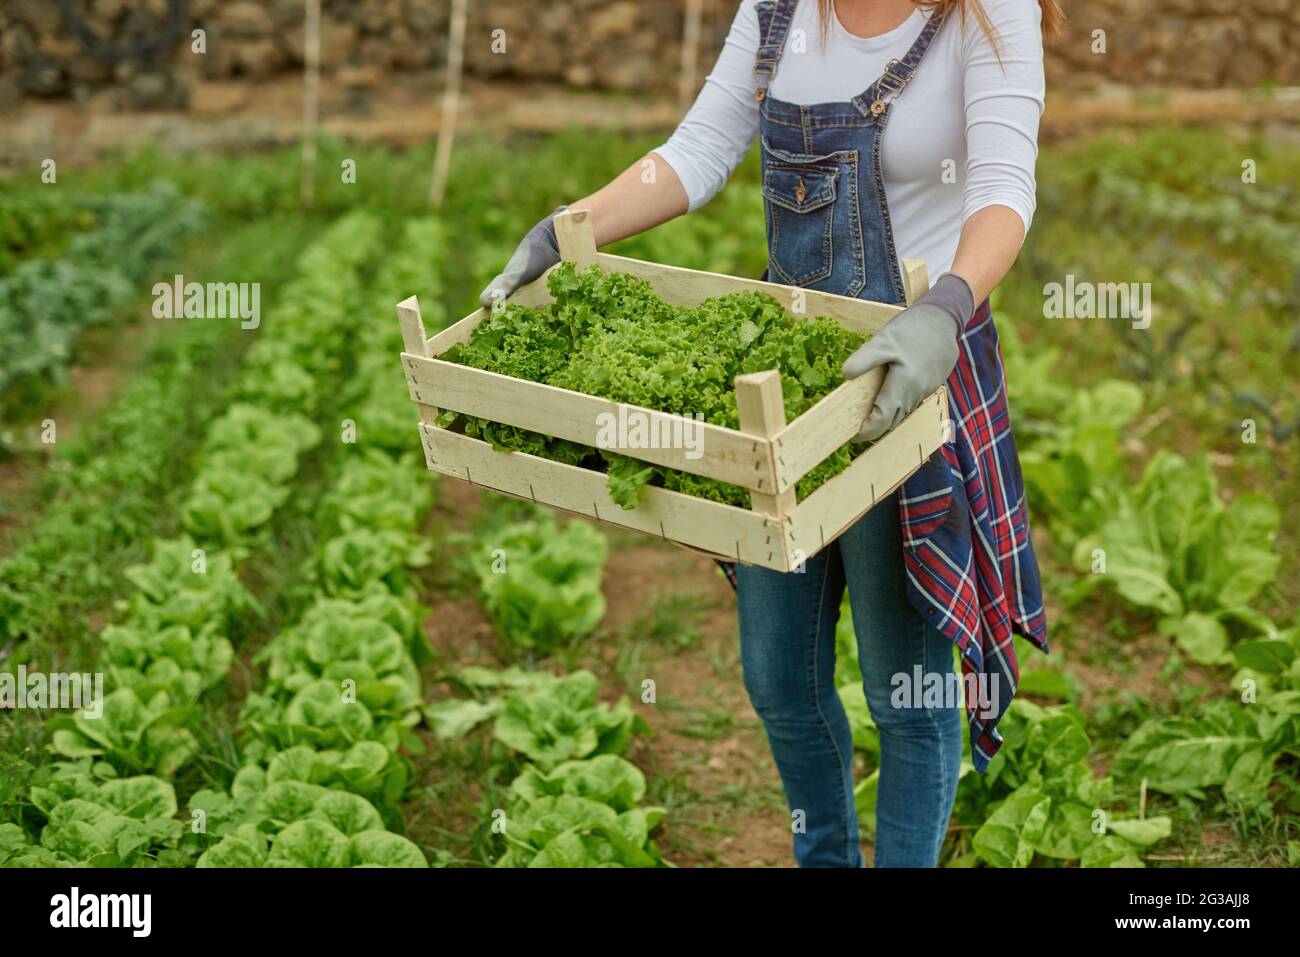 Crop farmer with green lettuce in box on plantation Stock Photo